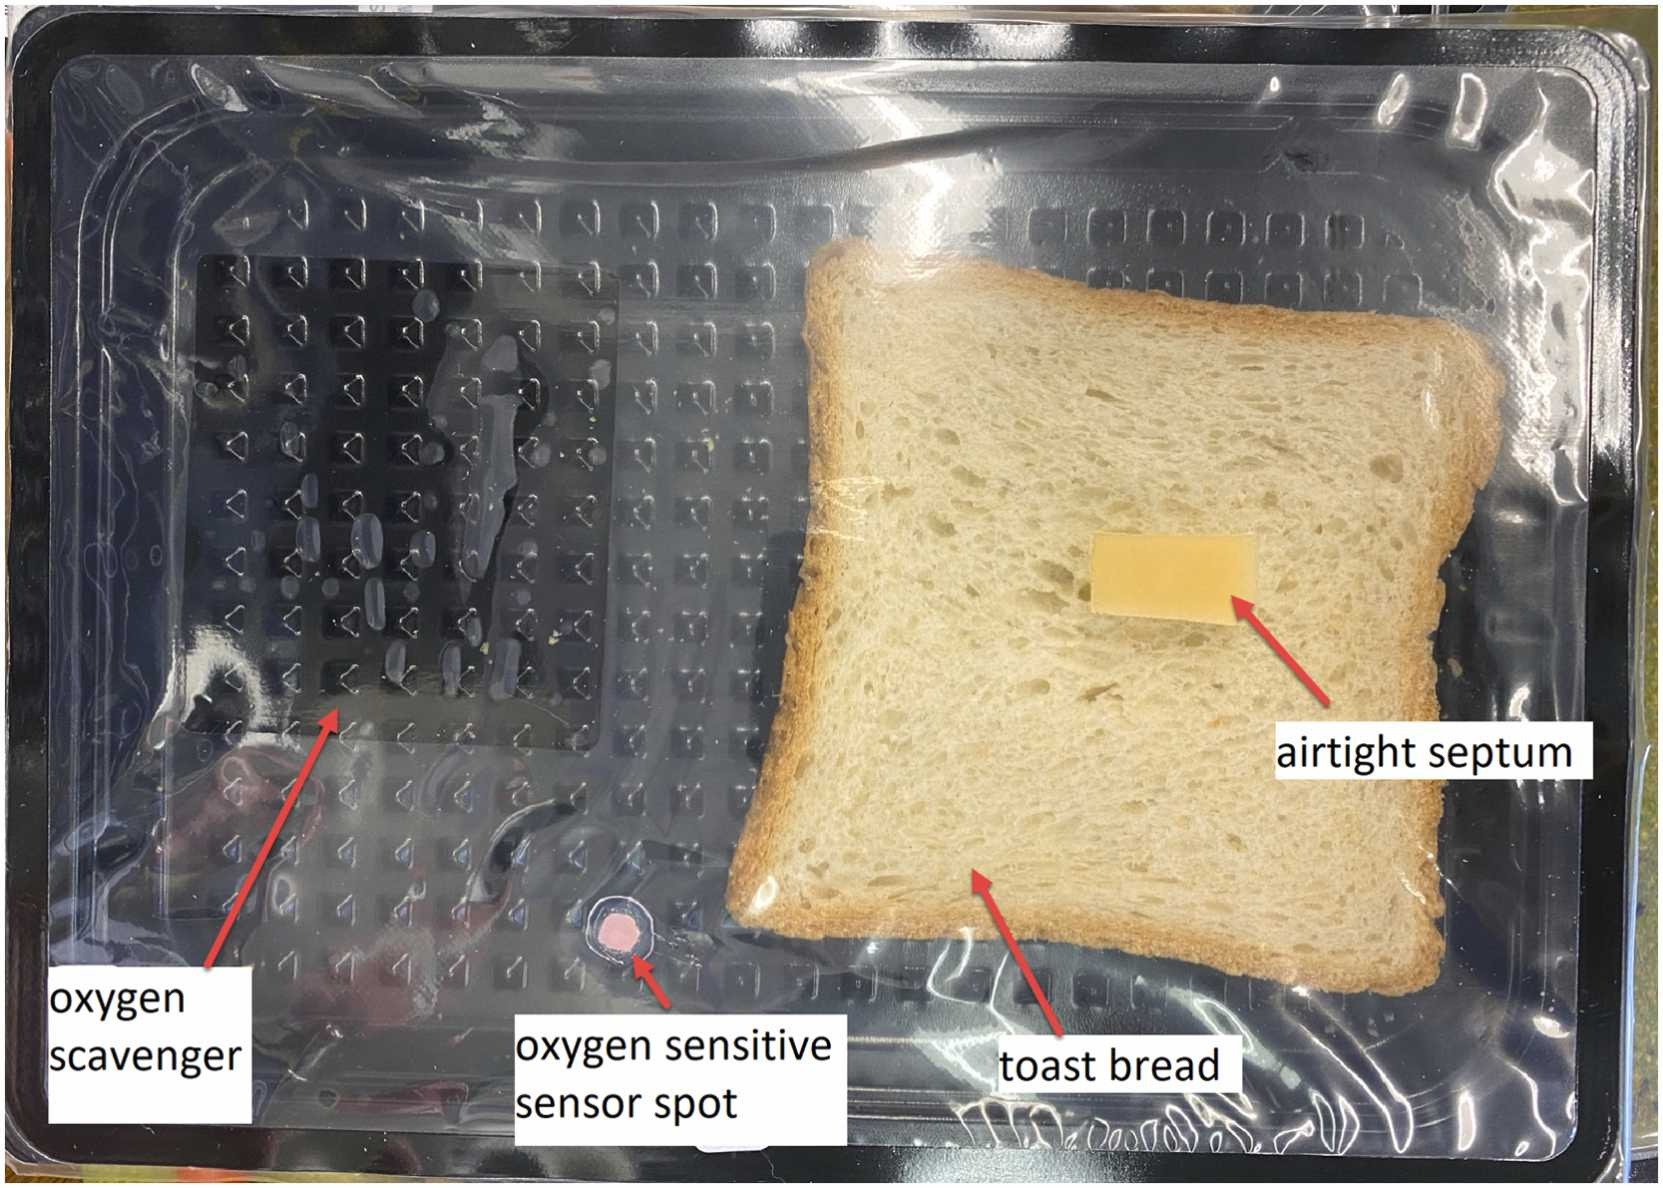 Experimental set-up to evaluate the influence of palladium-based oxygen scavenger on the mould free shelf life of bakery products. High barrier tray containing the oxygen scavenger (catalytic system based on palladium) attached on the lidding film, toast bread slice, airtight septum through which the bakery sample was inoculated and an oxygen sensitive sensor spot.